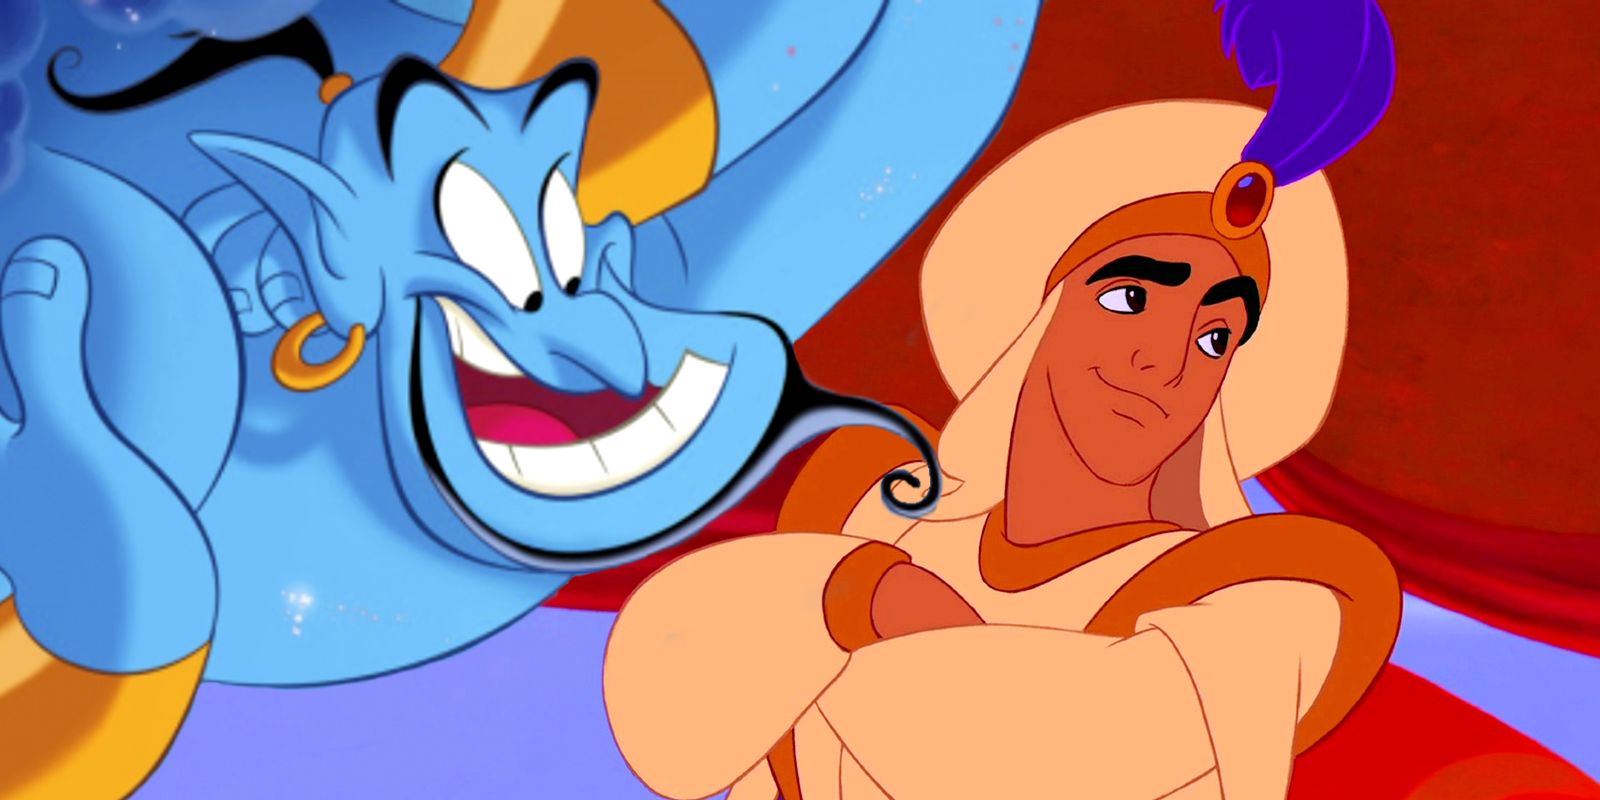 Aladdin: The Entire Movie Is Just His First Wish - Disney Theory